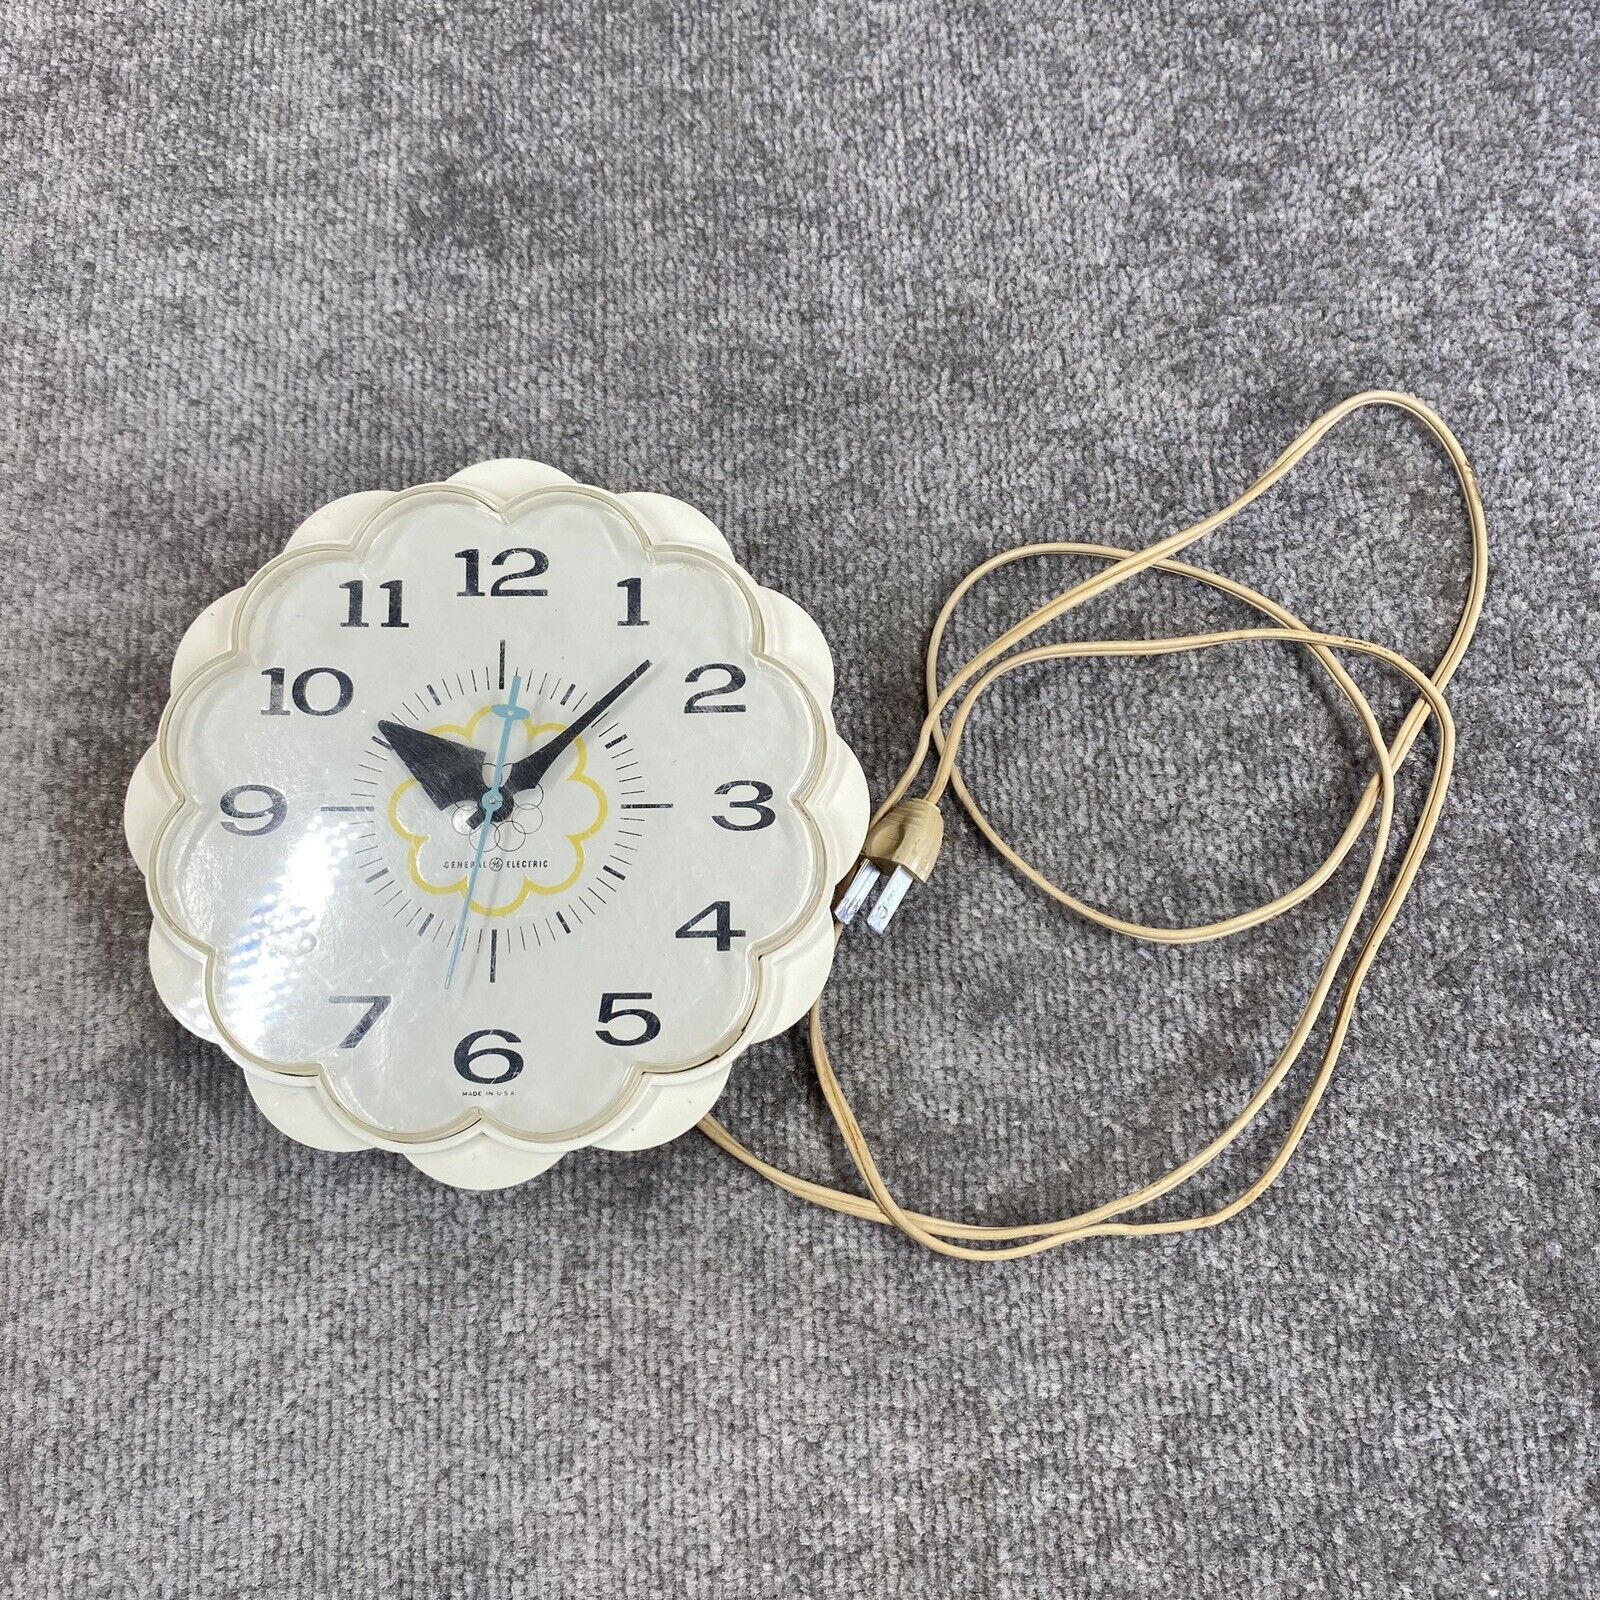 Vintage General Electric Daisy Wall Clock White Plastic Power Chord Retro Kitsch